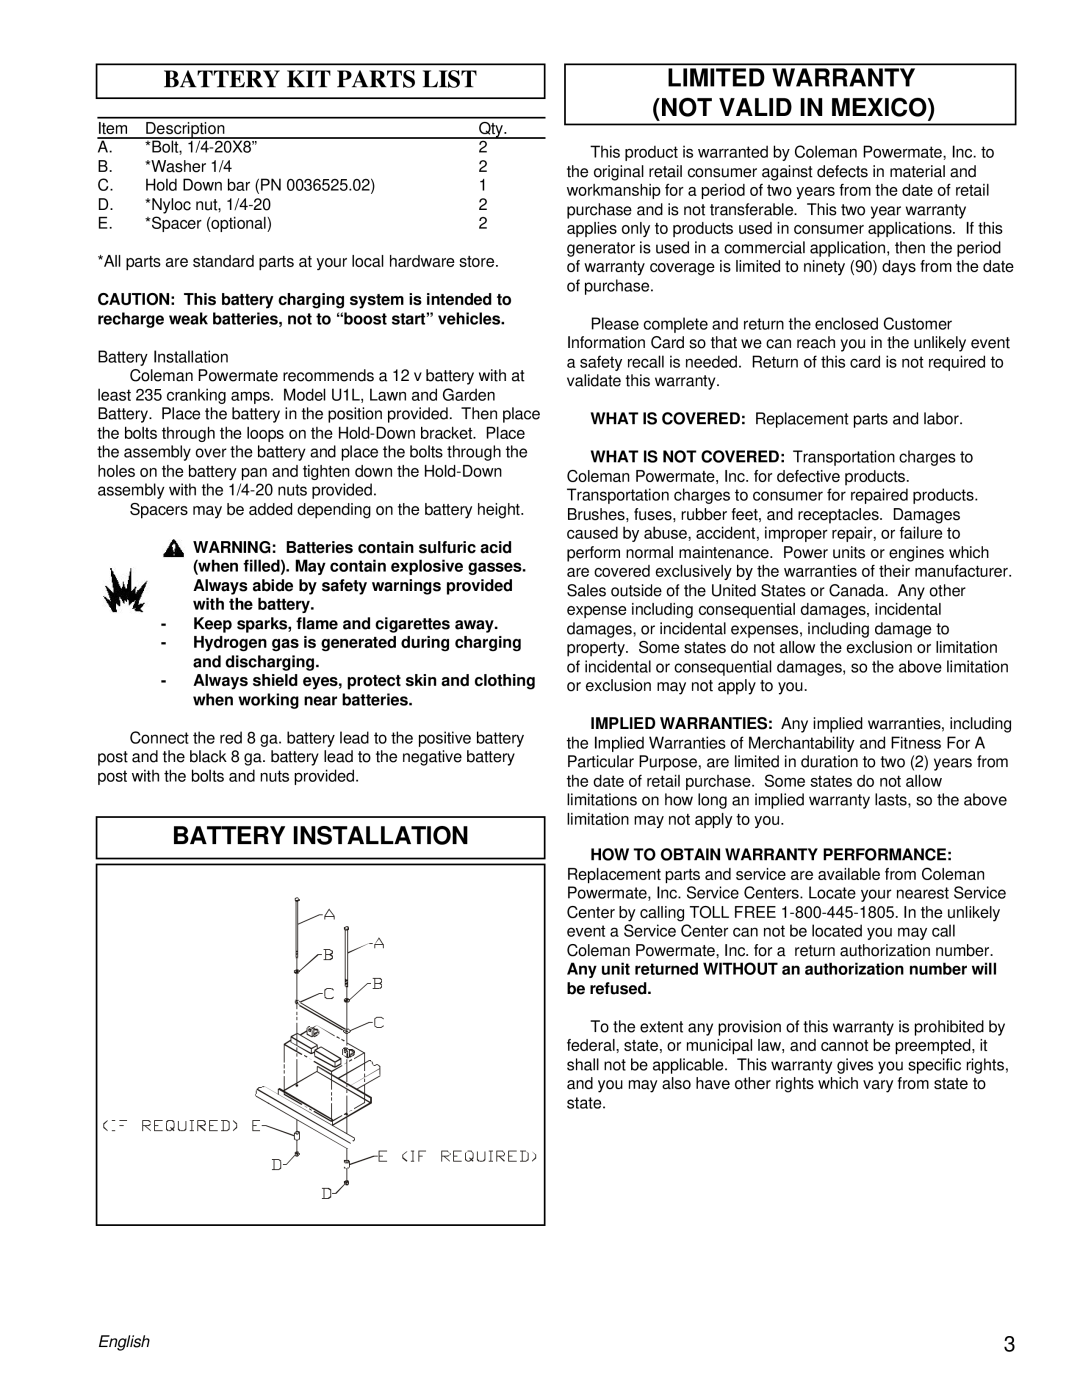 Powermate PM0505622.18 manual Battery Installation, Battery Kit Parts List, Limited Warranty Not Valid In Mexico, English 